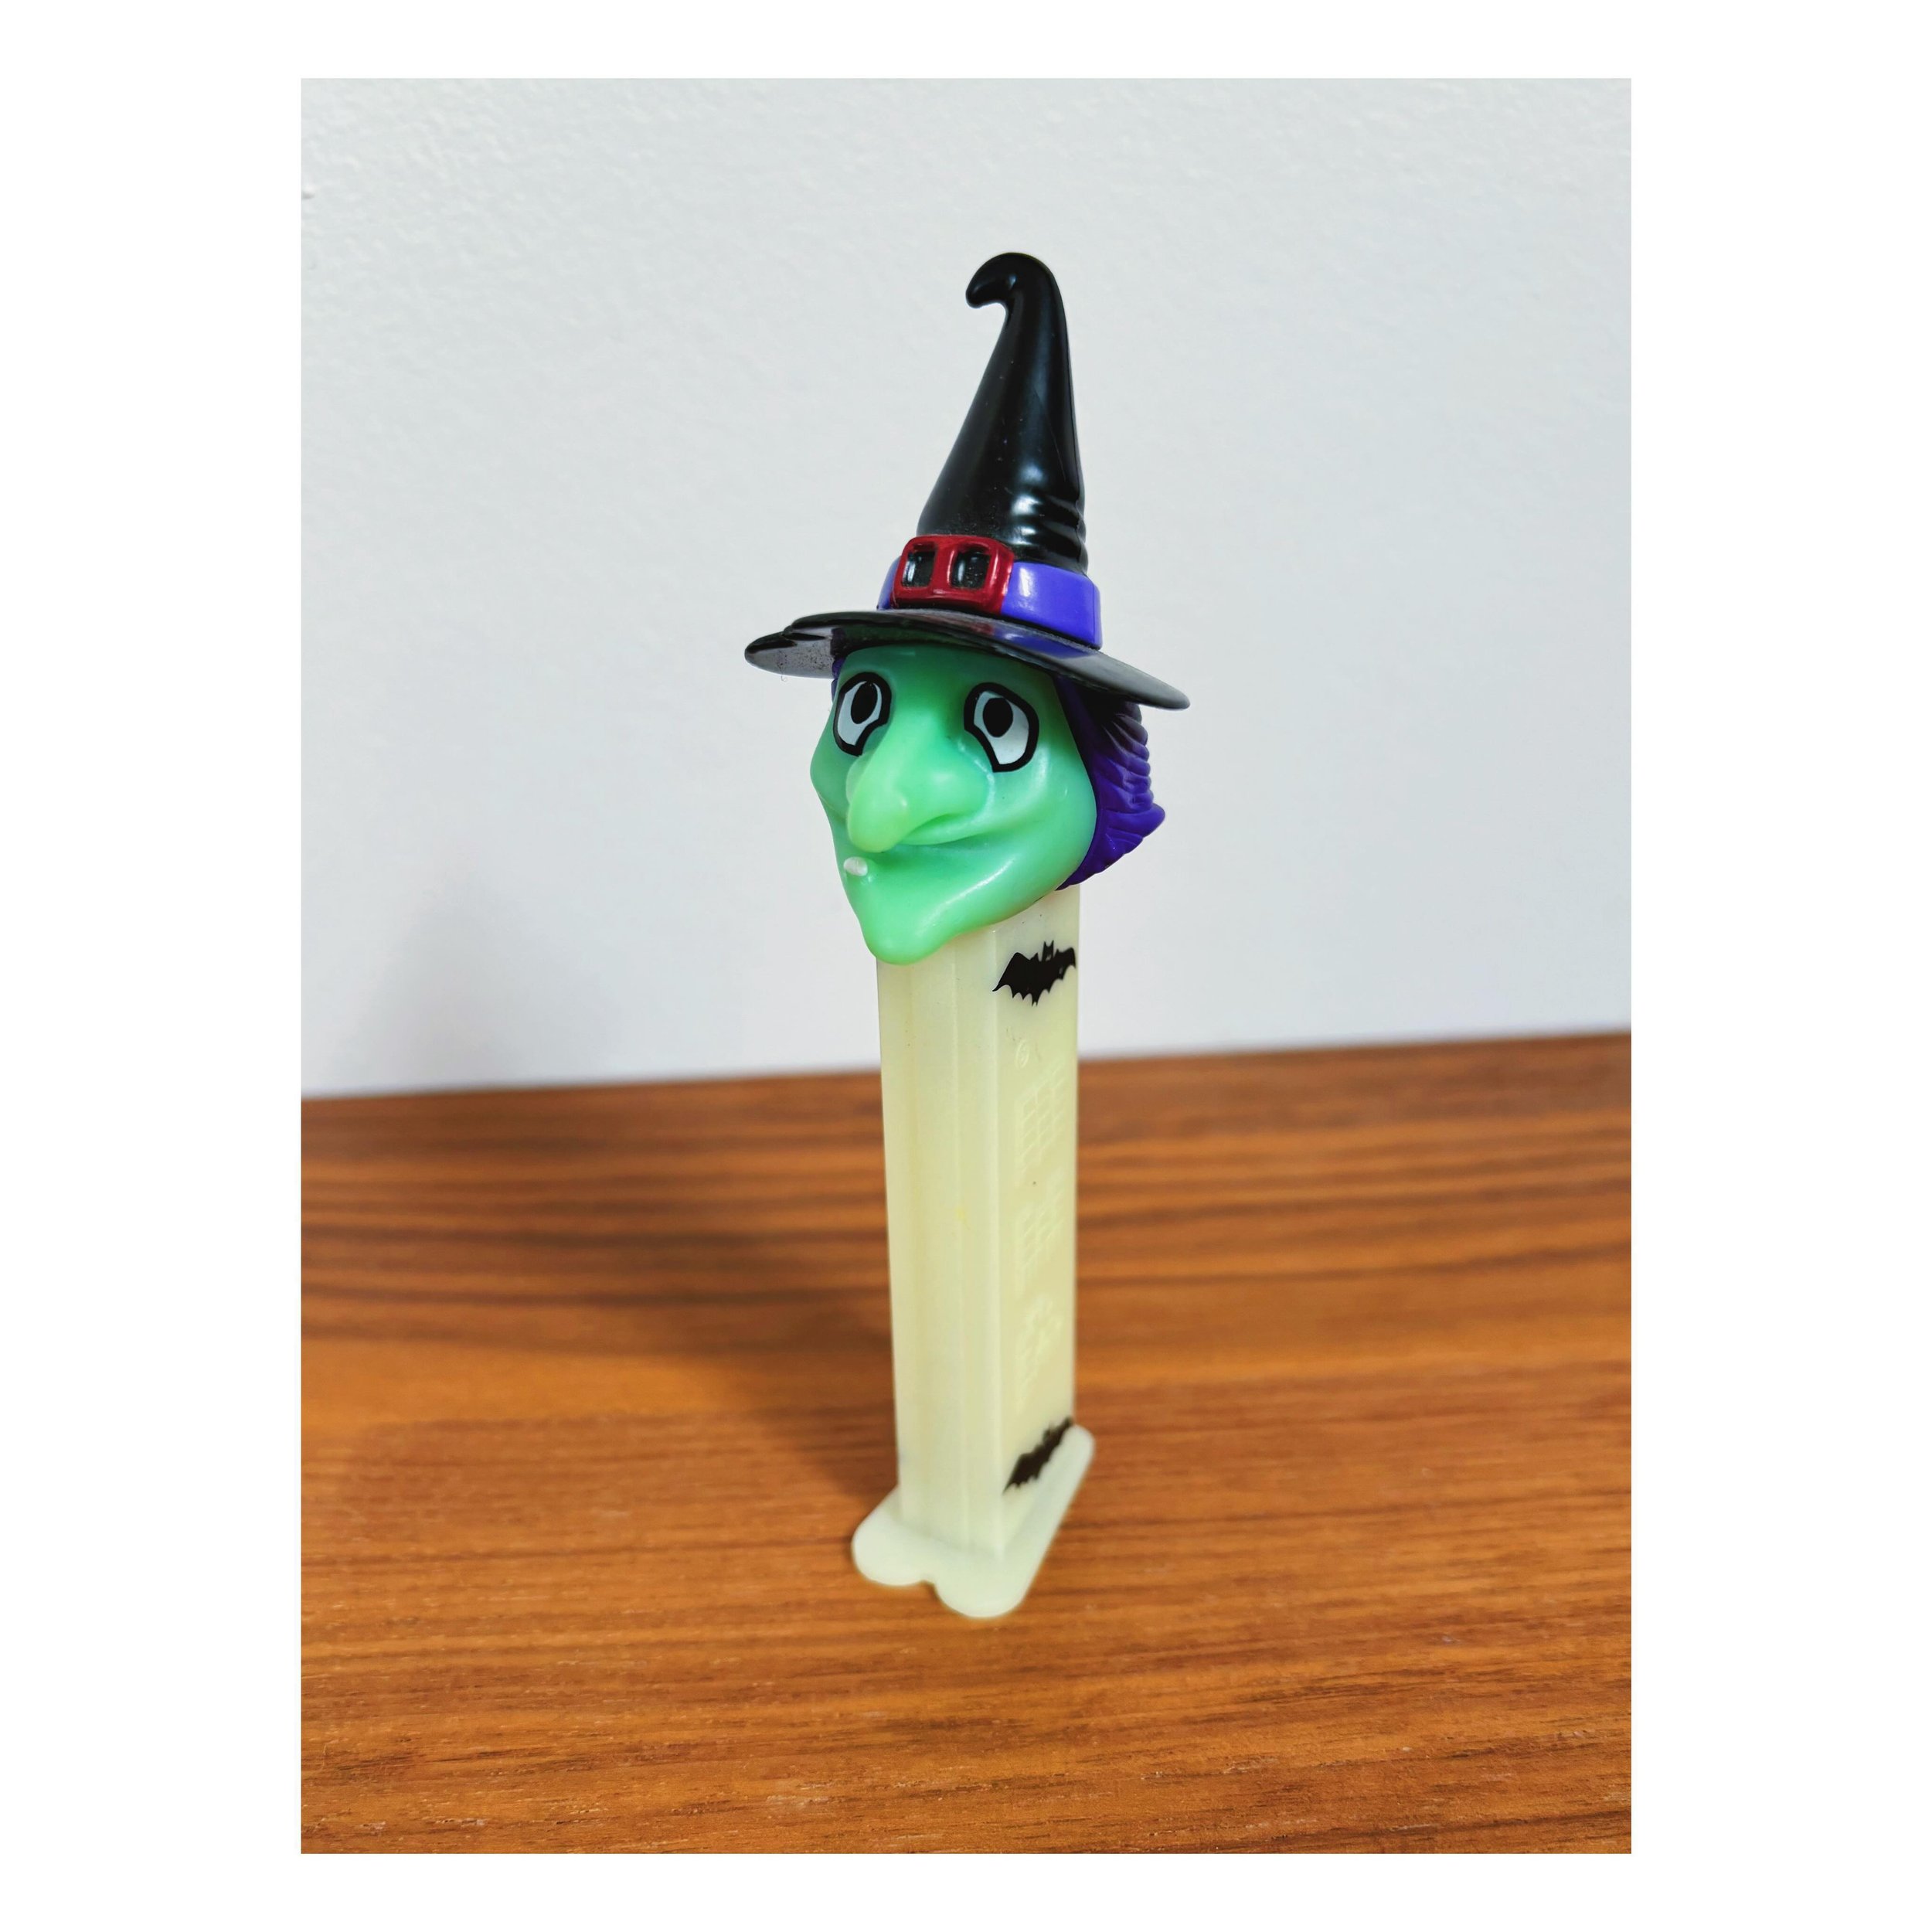 A hex on you all 🧙&zwj;♀️
.
.
#pez #pezdispenser #candy #witch